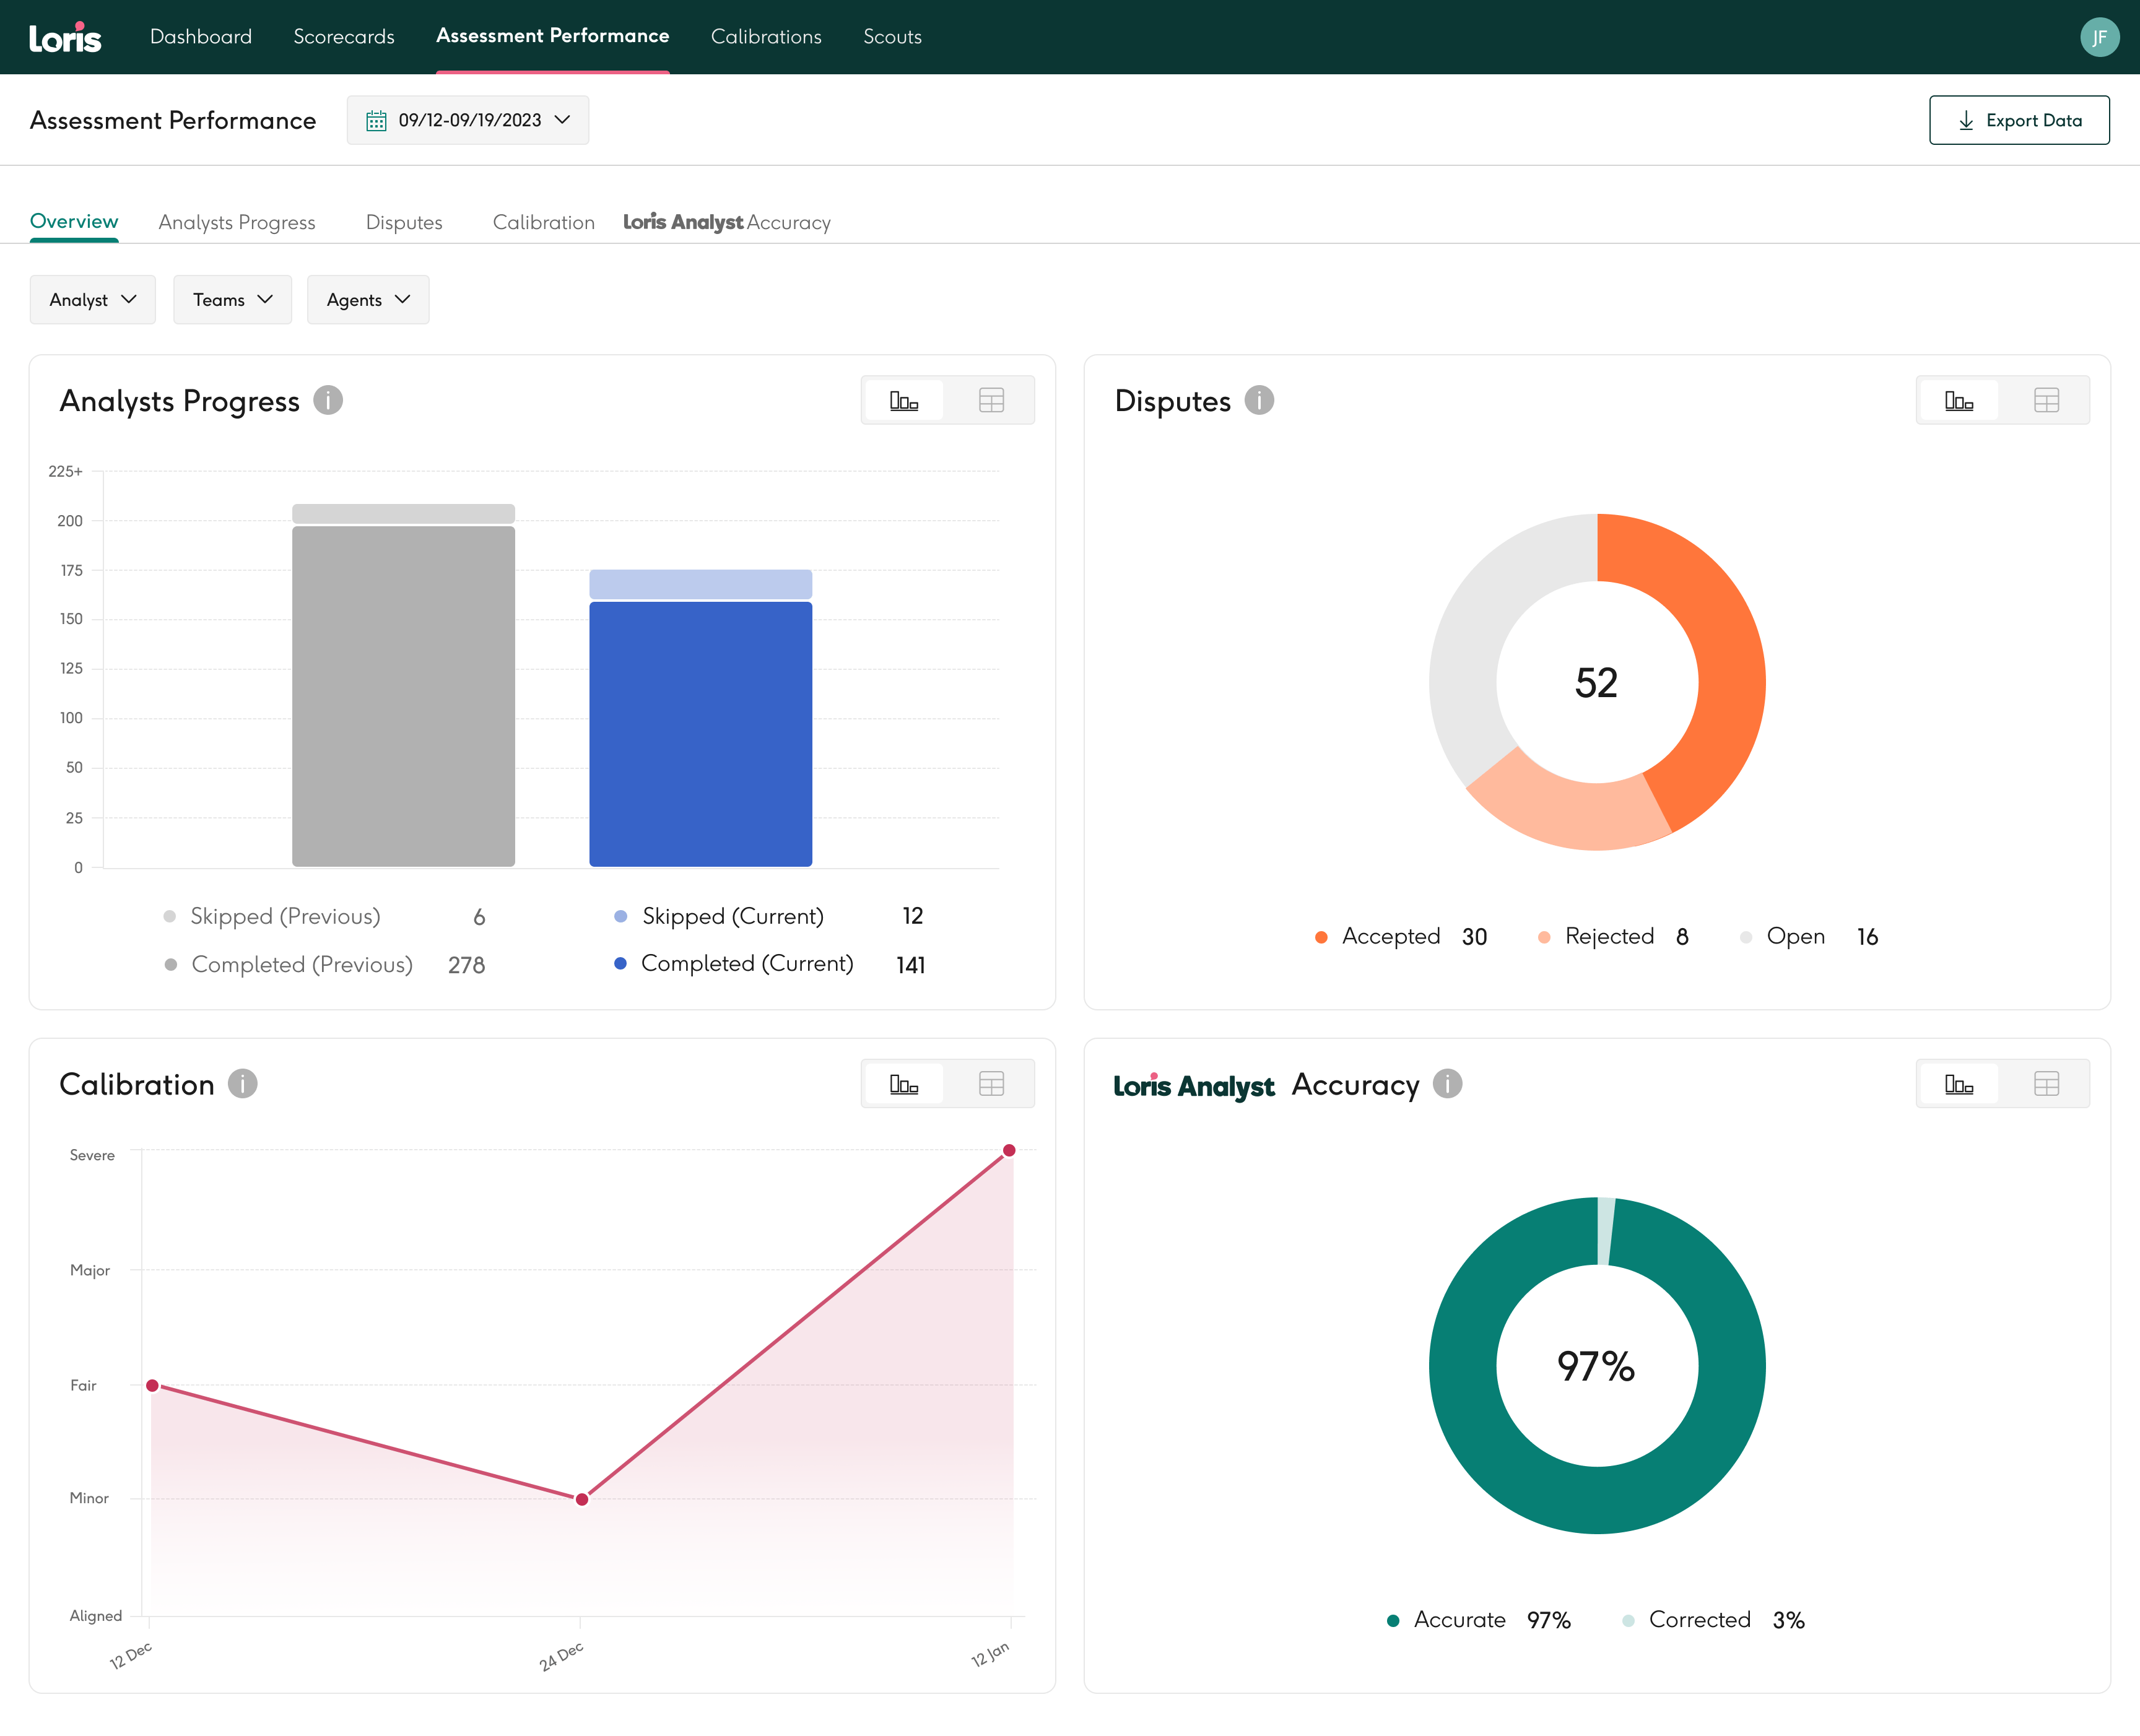 Assessment Performance Dashboard: User interface with multiple dashboard widgets